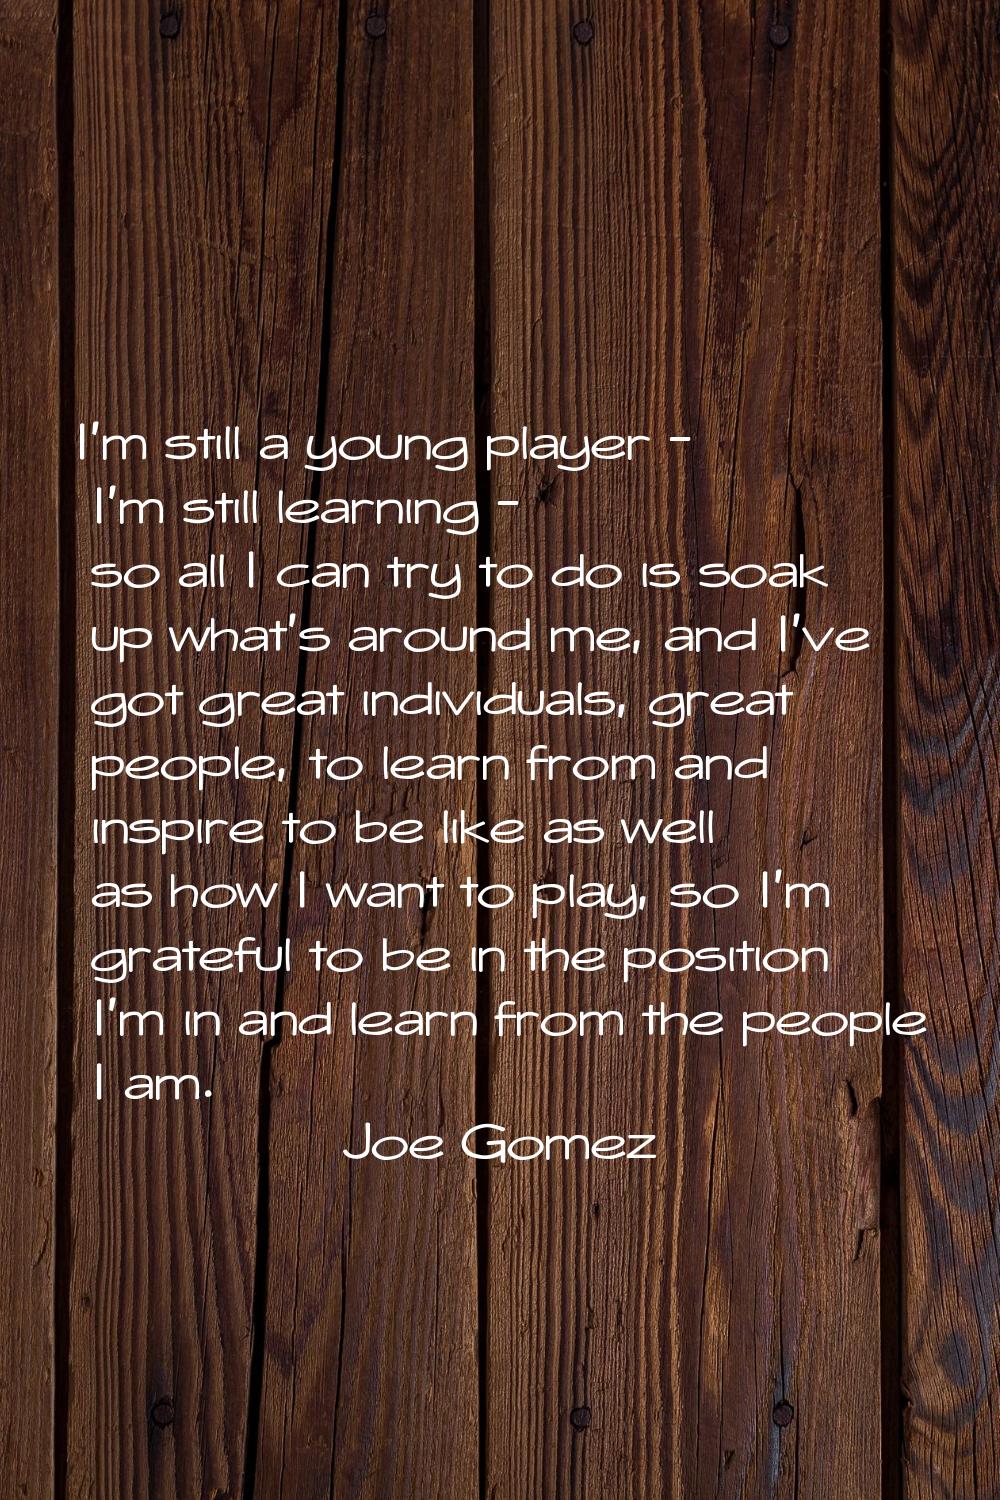 I'm still a young player - I'm still learning - so all I can try to do is soak up what's around me,